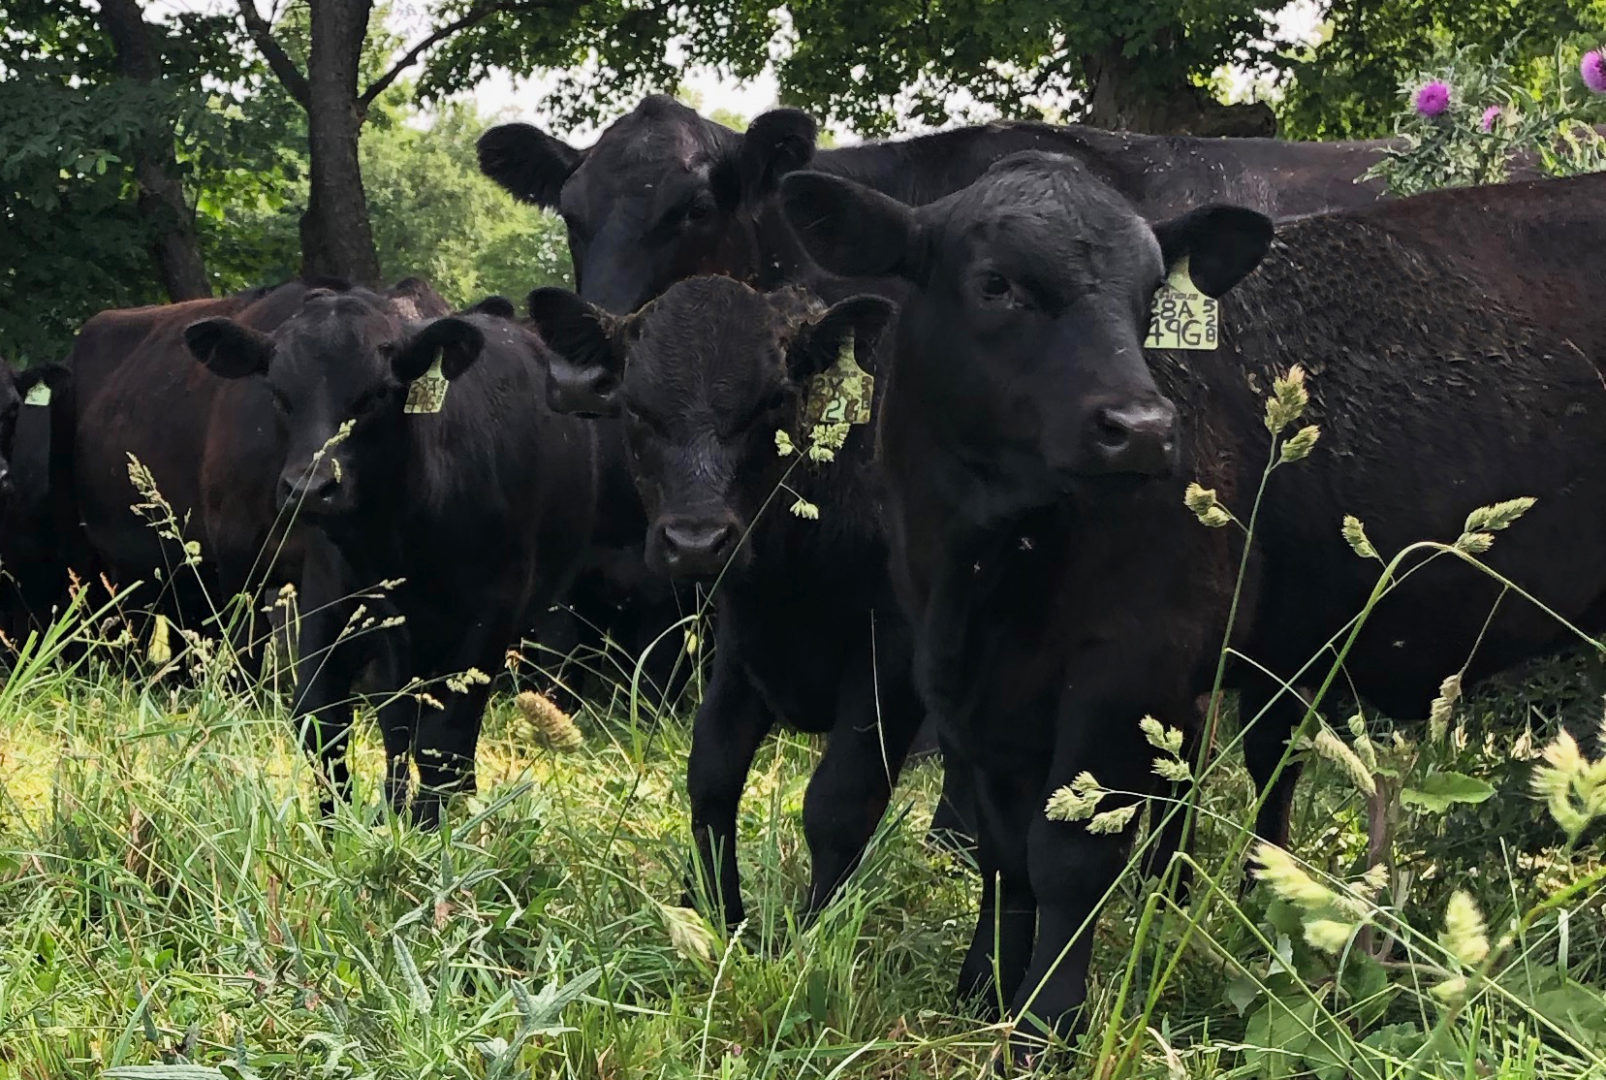 Group of black cows standing in grass field